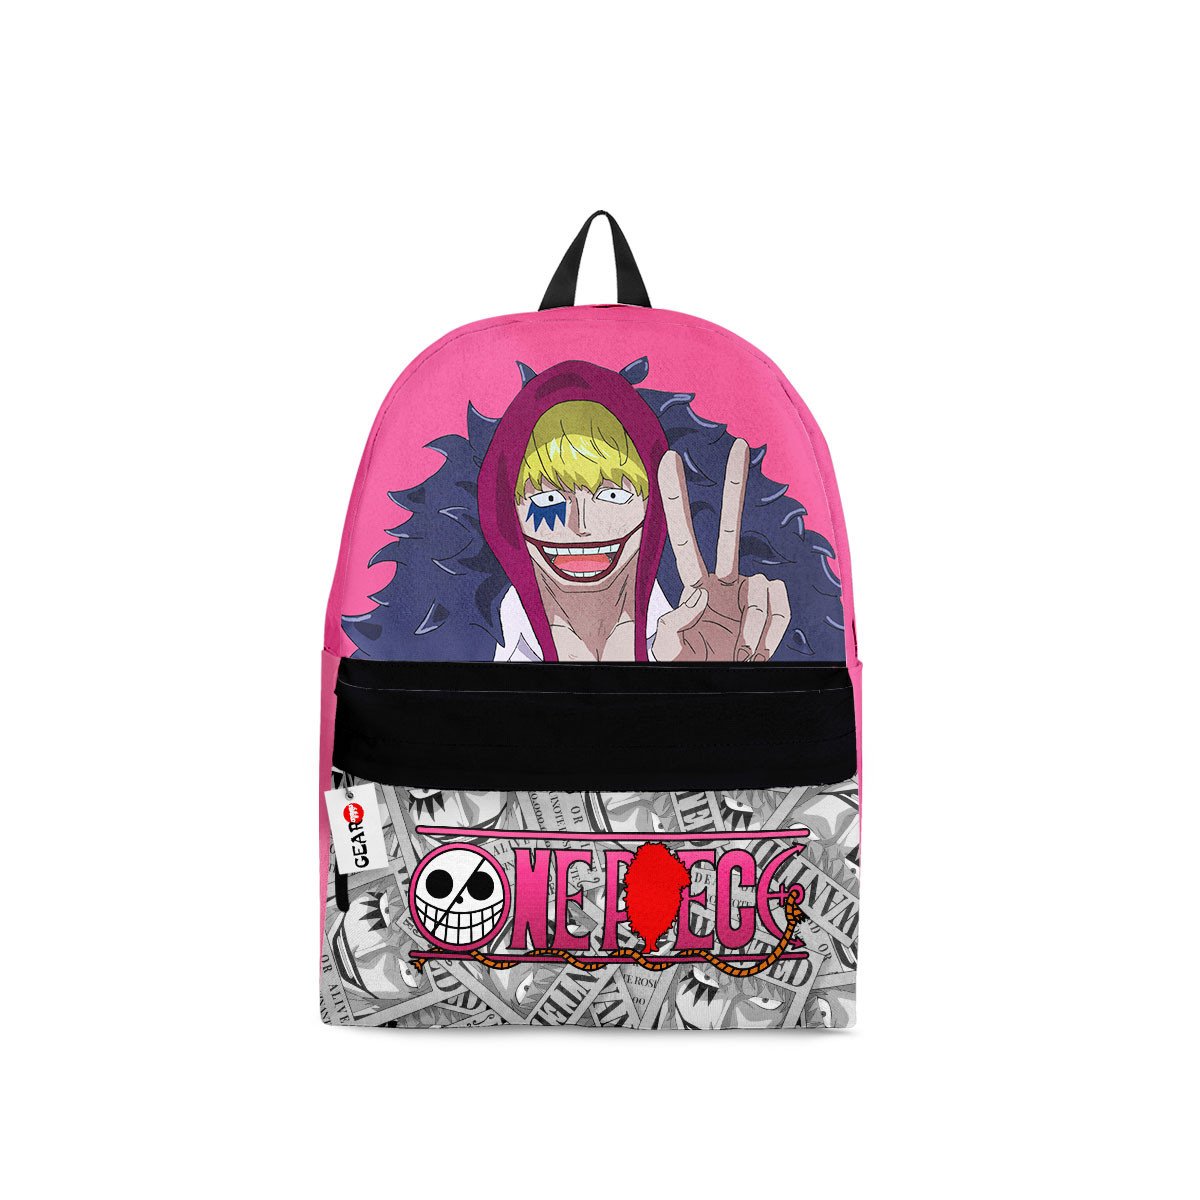 BEST Donquixote Rosinante One Piece Anime Printed 3D Leisure Backpack